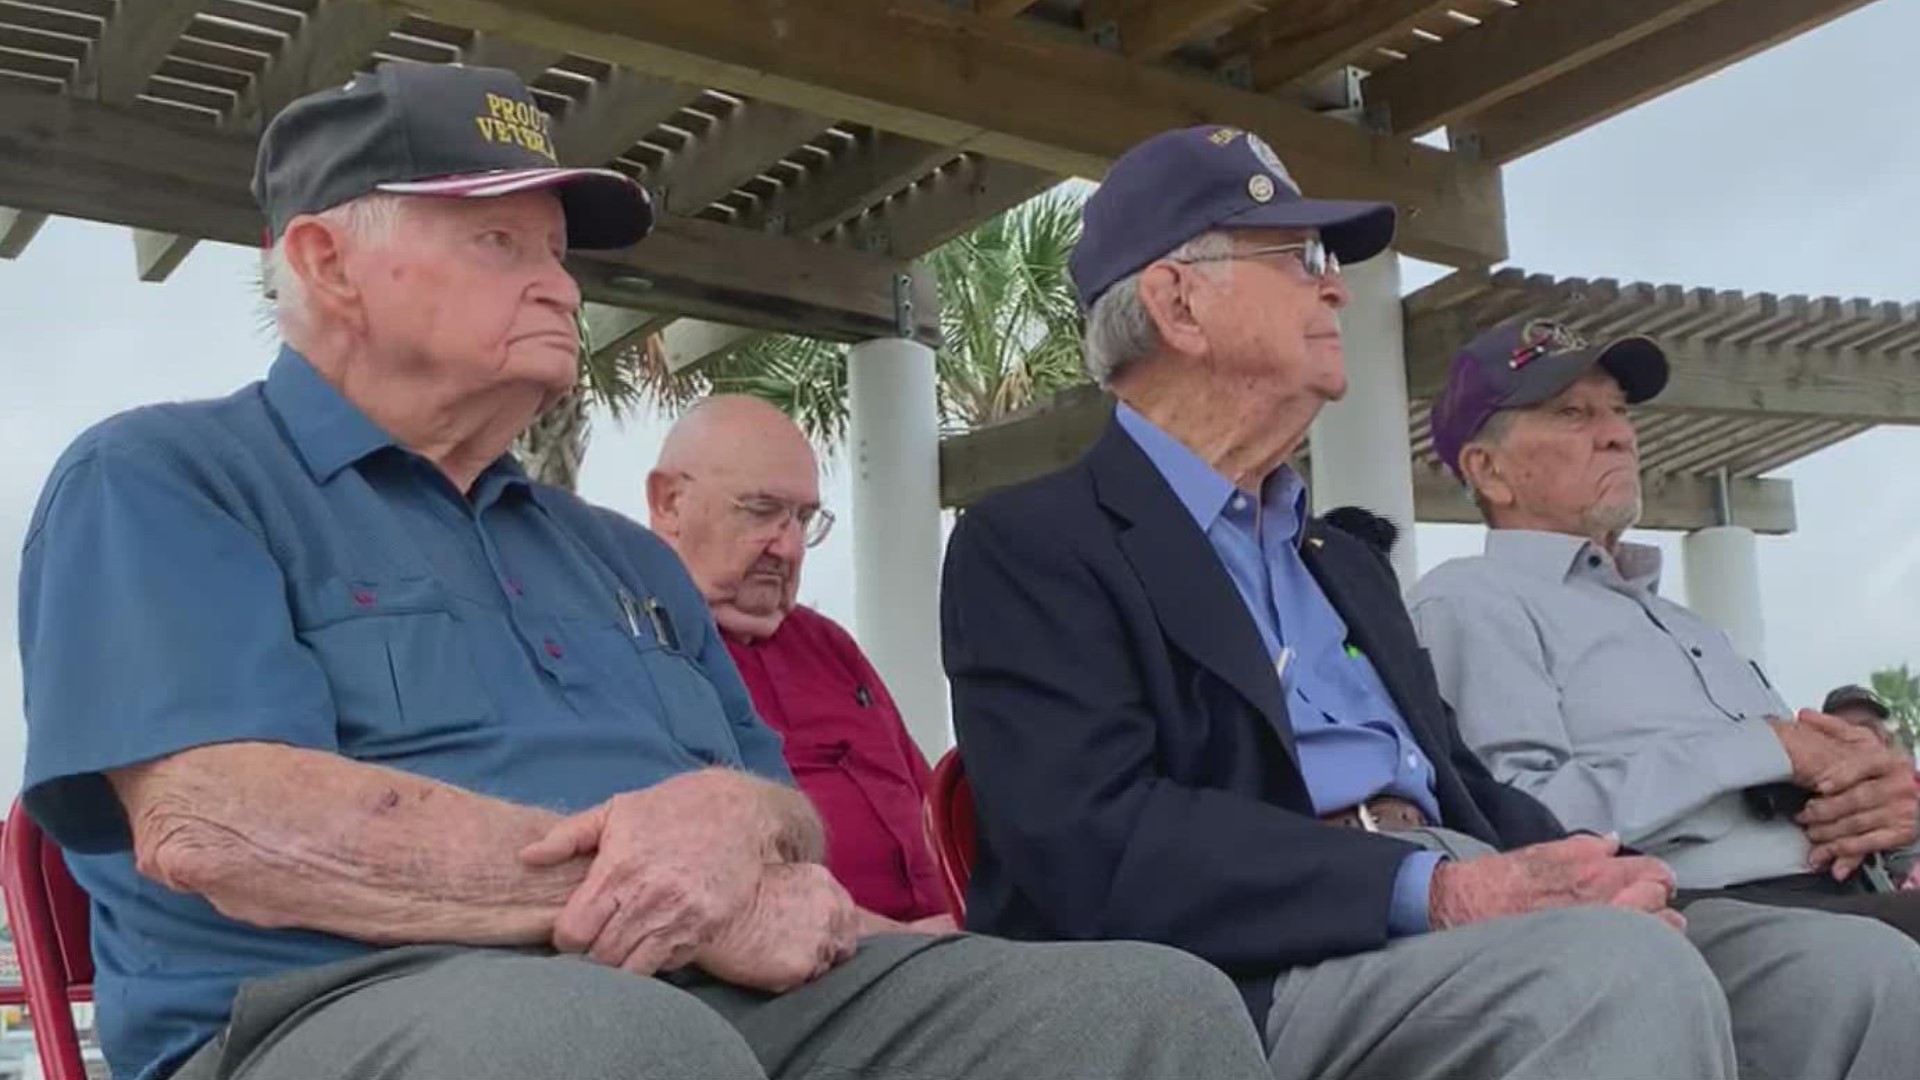 "People don’t care you can see it here," said World War II survivor Jose Mendez.